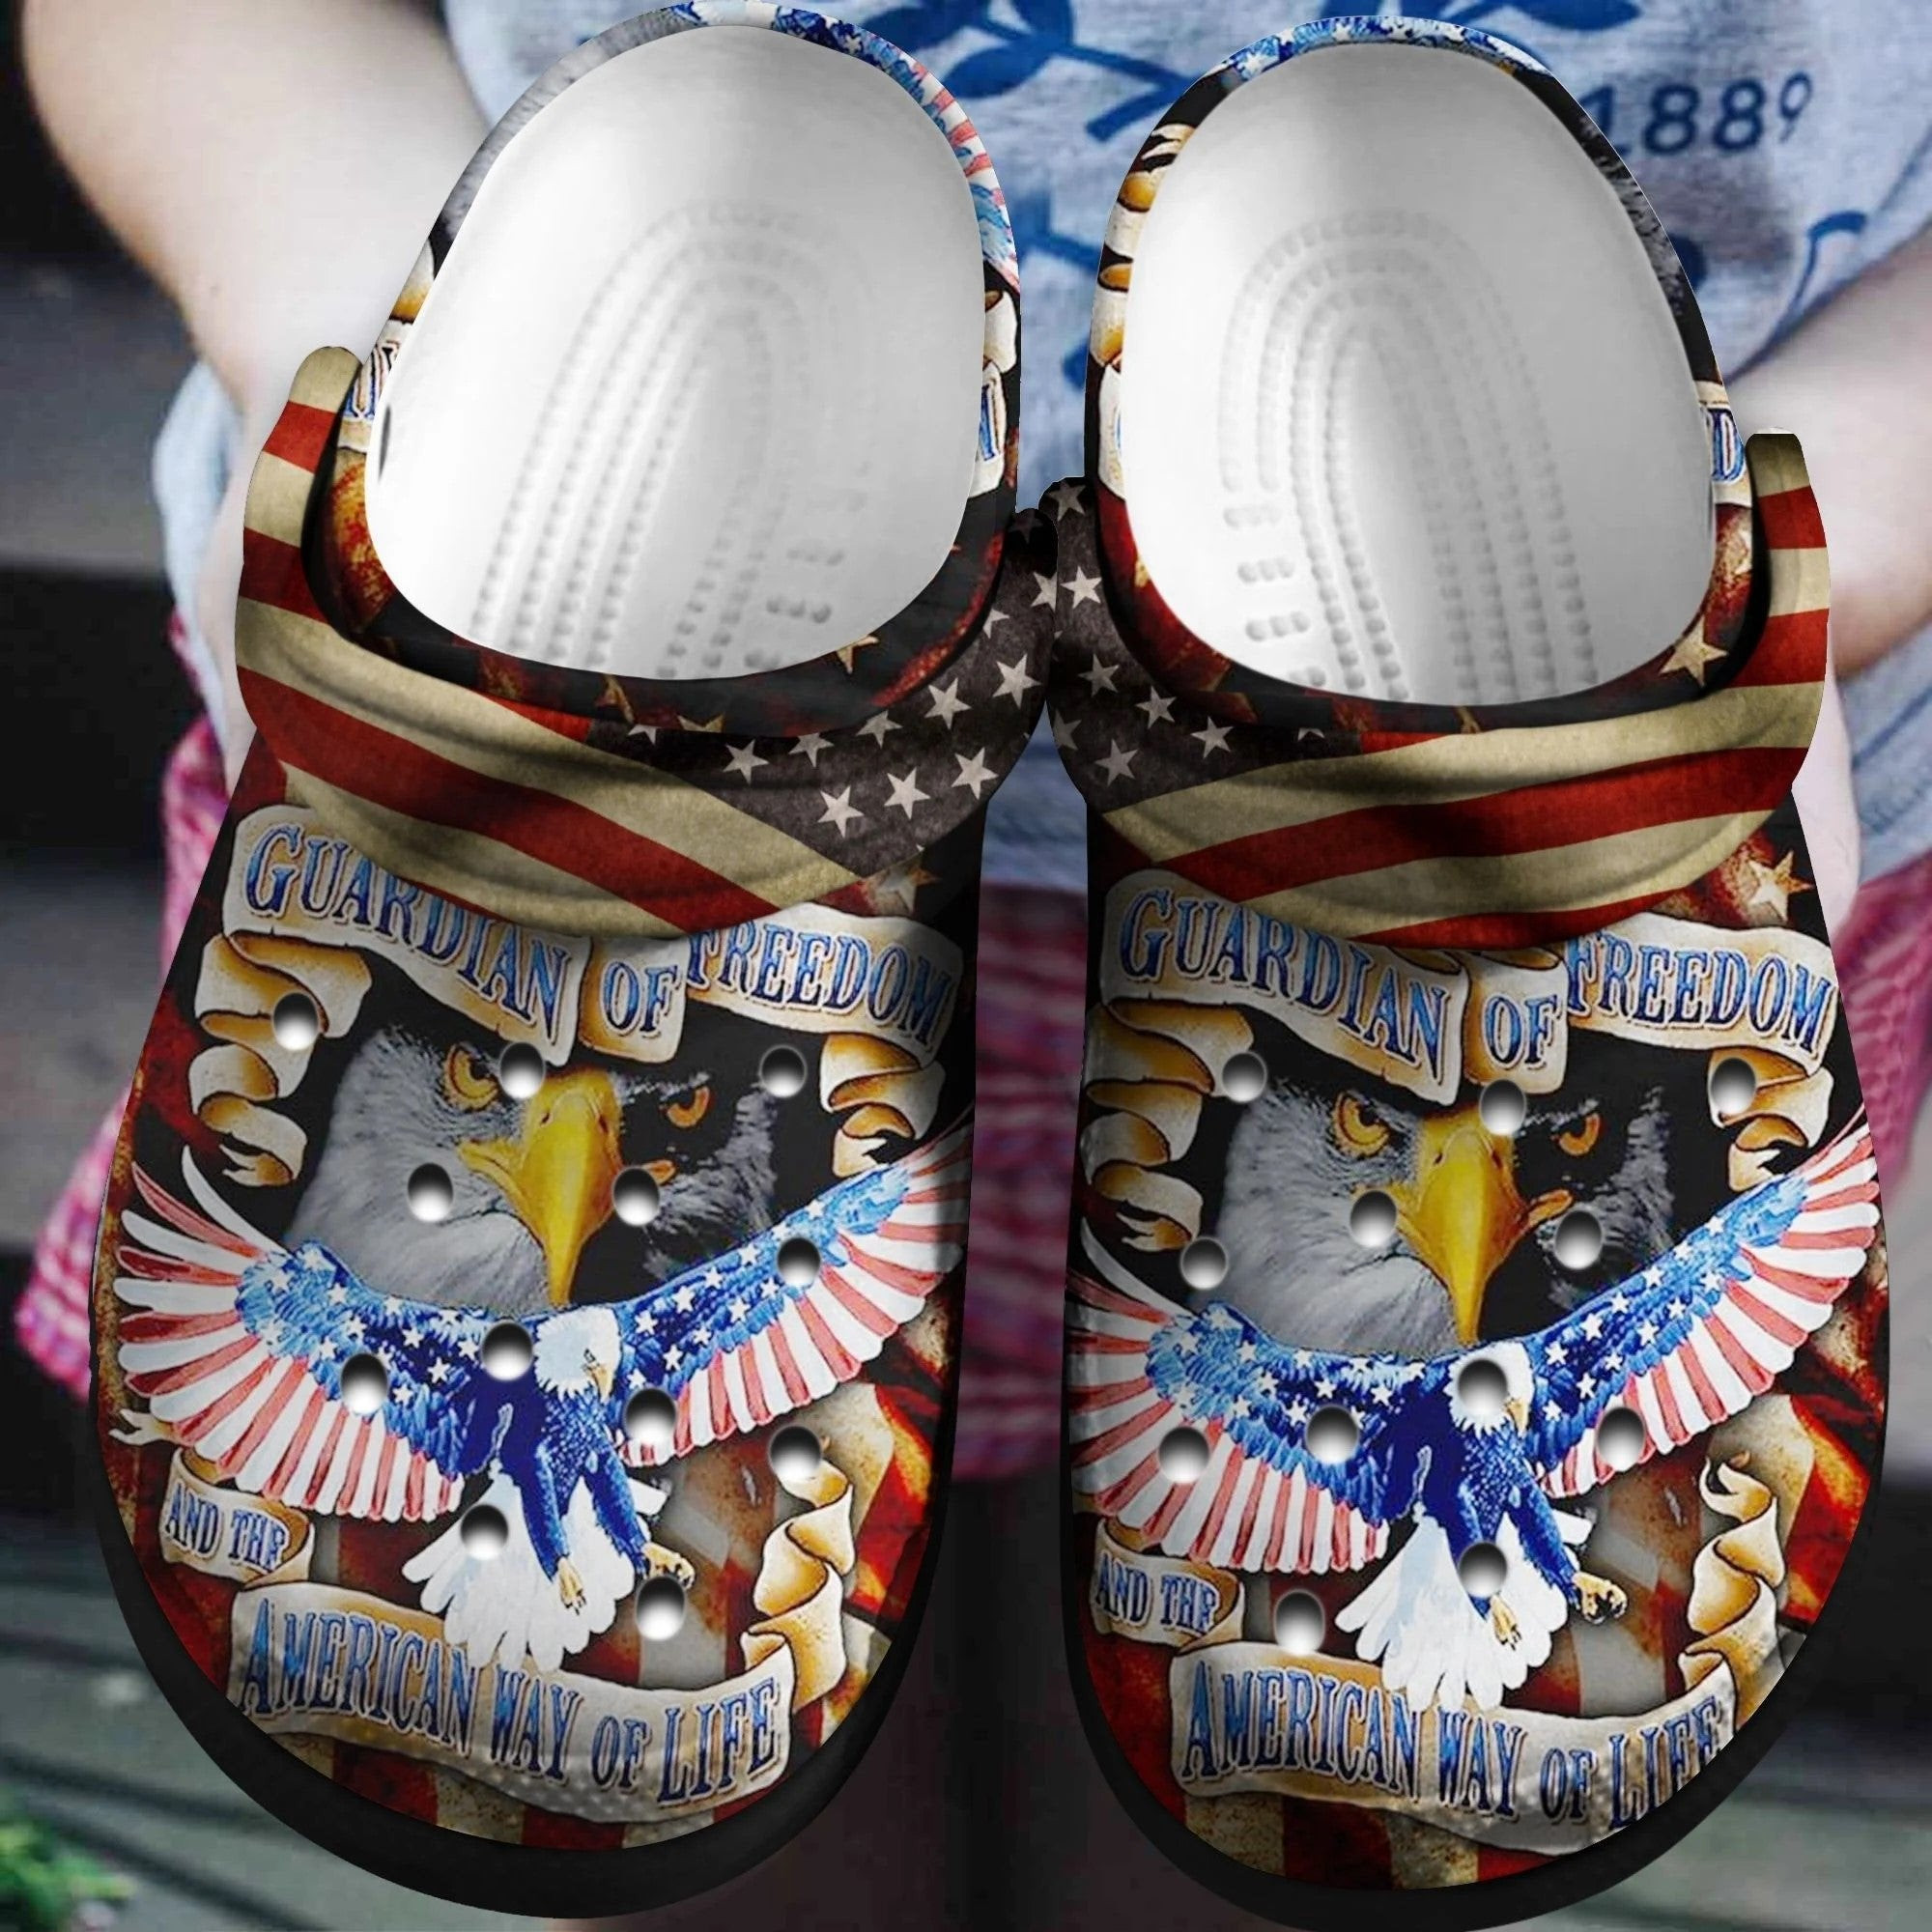 Eagle Independent Day Crocs Shoes American Way Of Life Gift